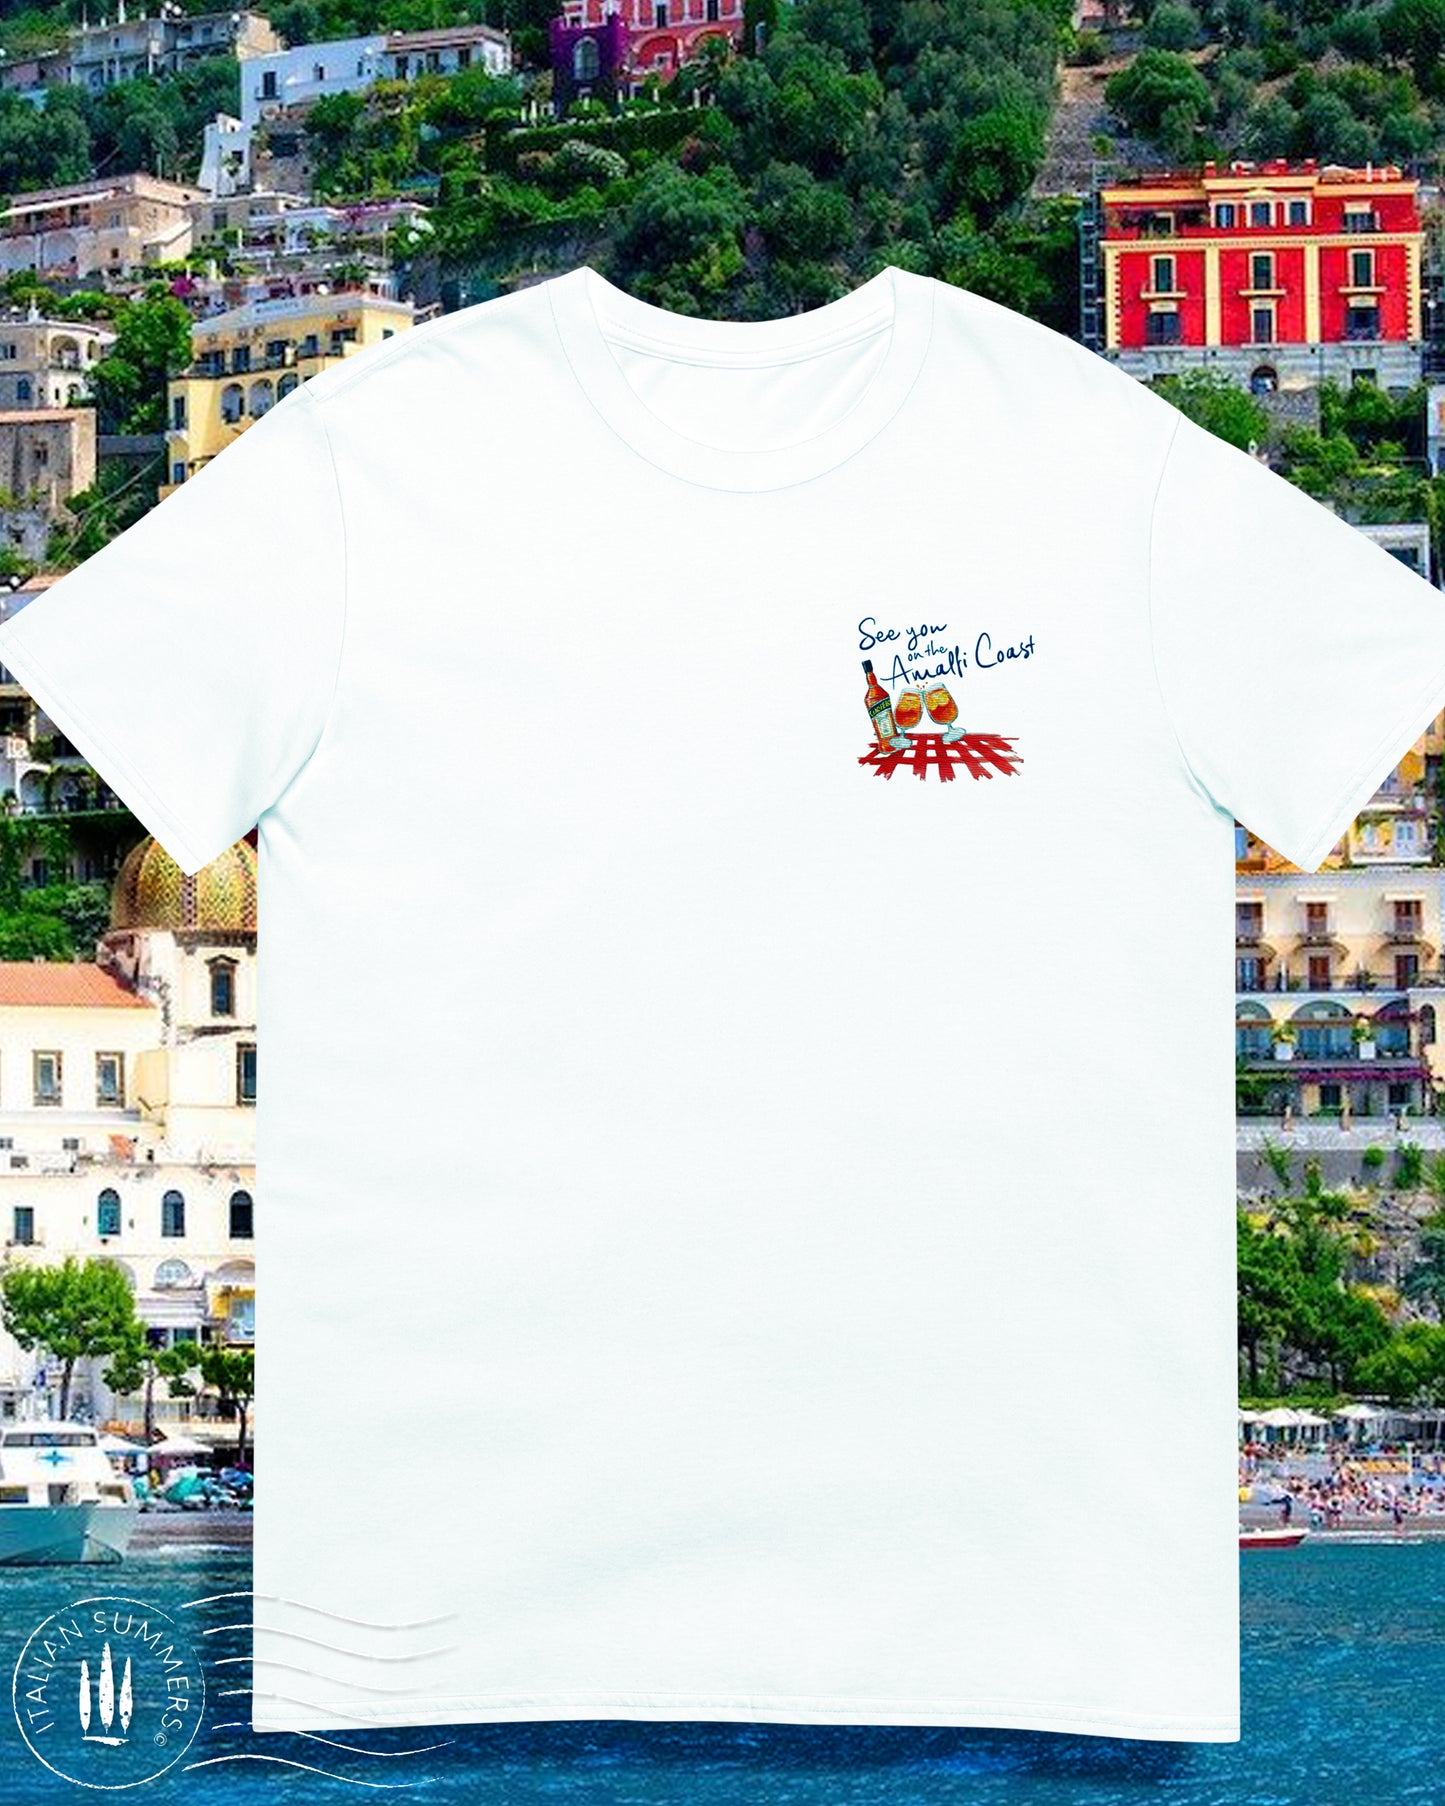 White cotton T shirt with an embroidered illustration on the left chest of two Aperol Spritz glasses in red-orange colors and a Aperol bottle on a red checkered tablecloth. Above, a Navy blue embroidered quote: See you on the Amalfi Coast.